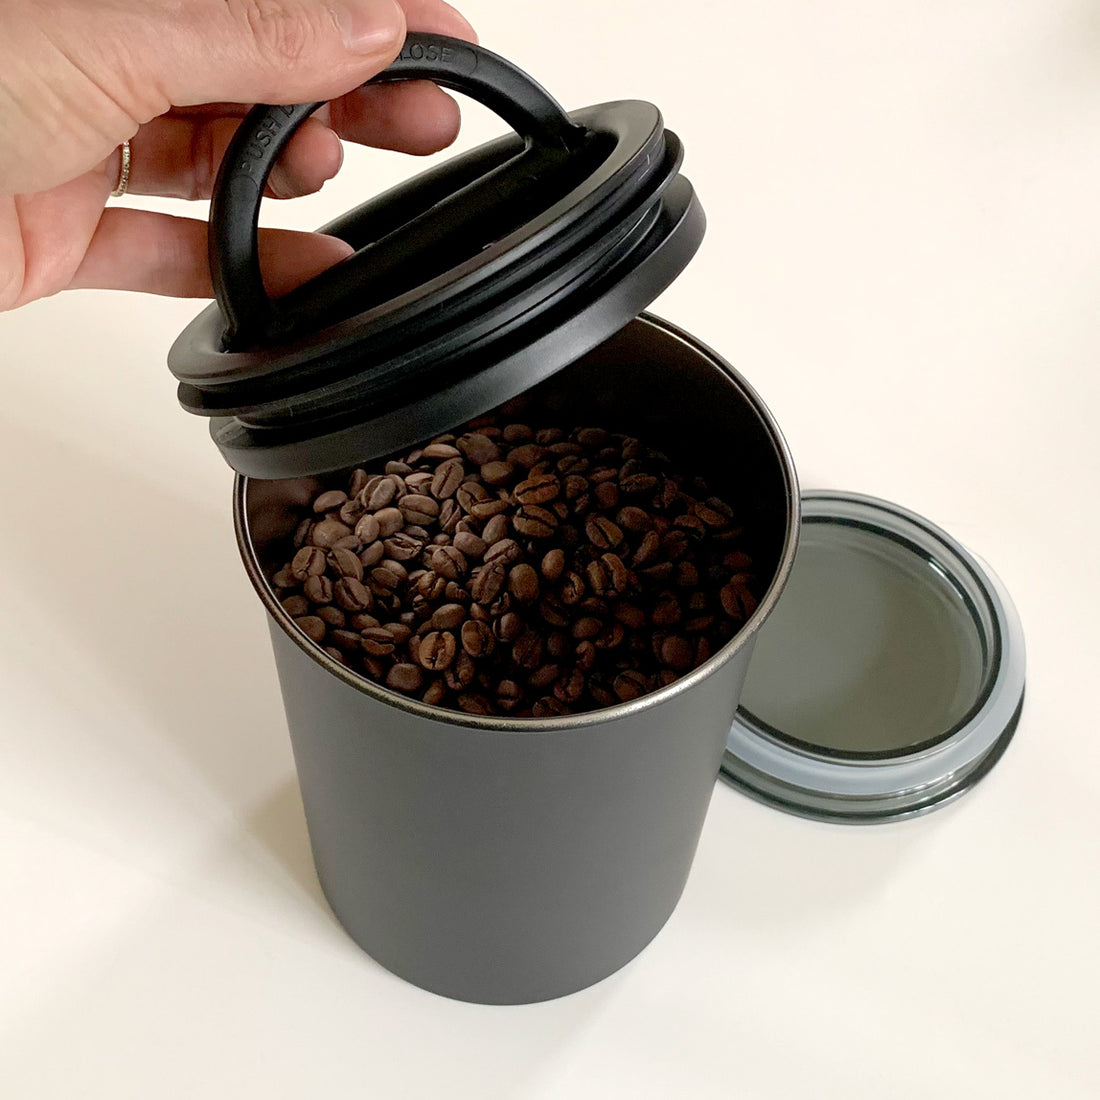 Coffee storage canister